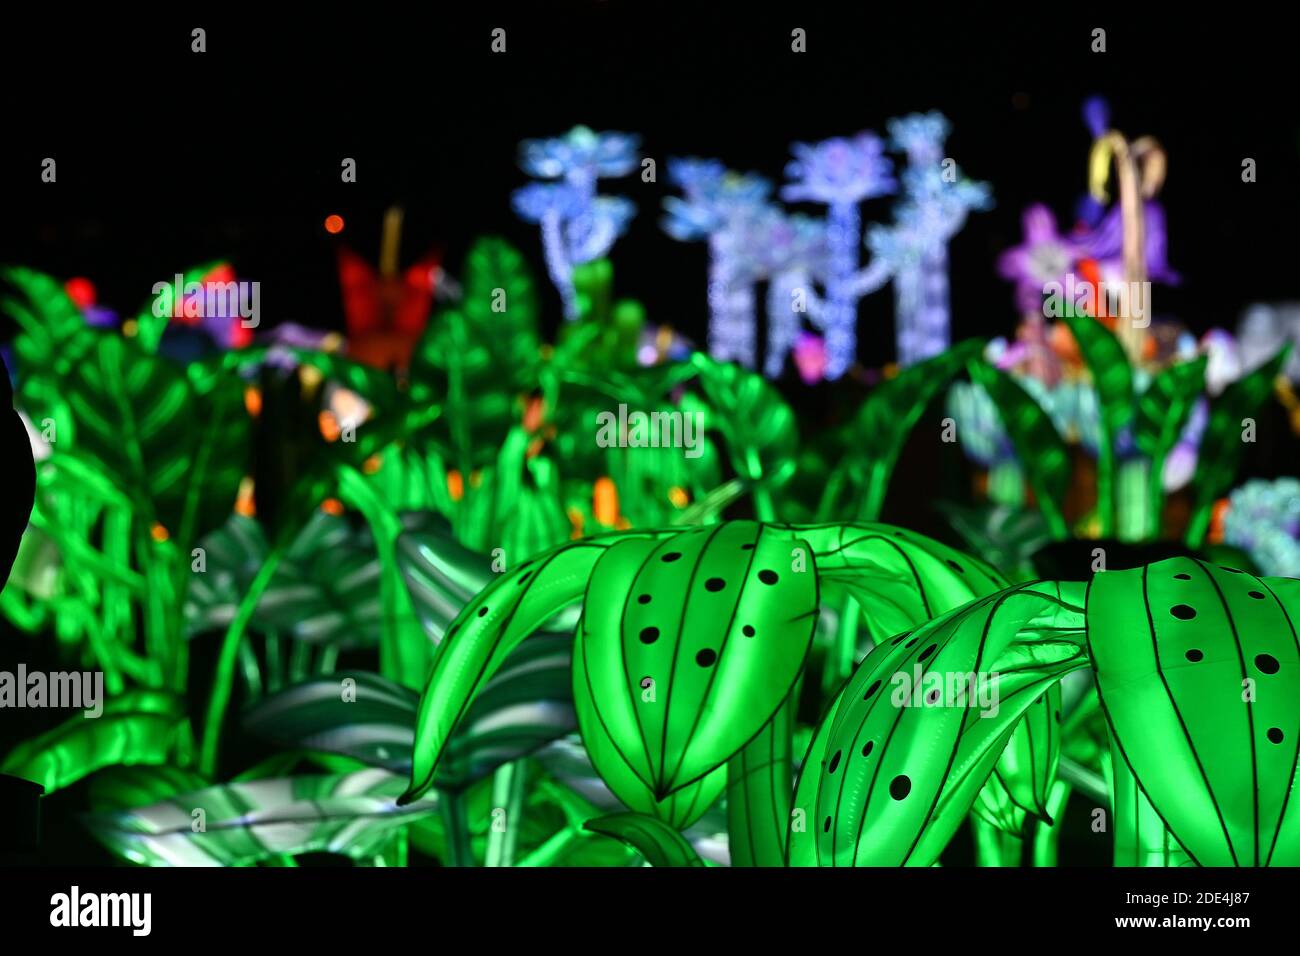 Displays of crafted lights in the shape of plants and animals on display  during the LuminoCity Festival on Randall's Island Park in New York, NY,  November 28, 2020. A combination of the